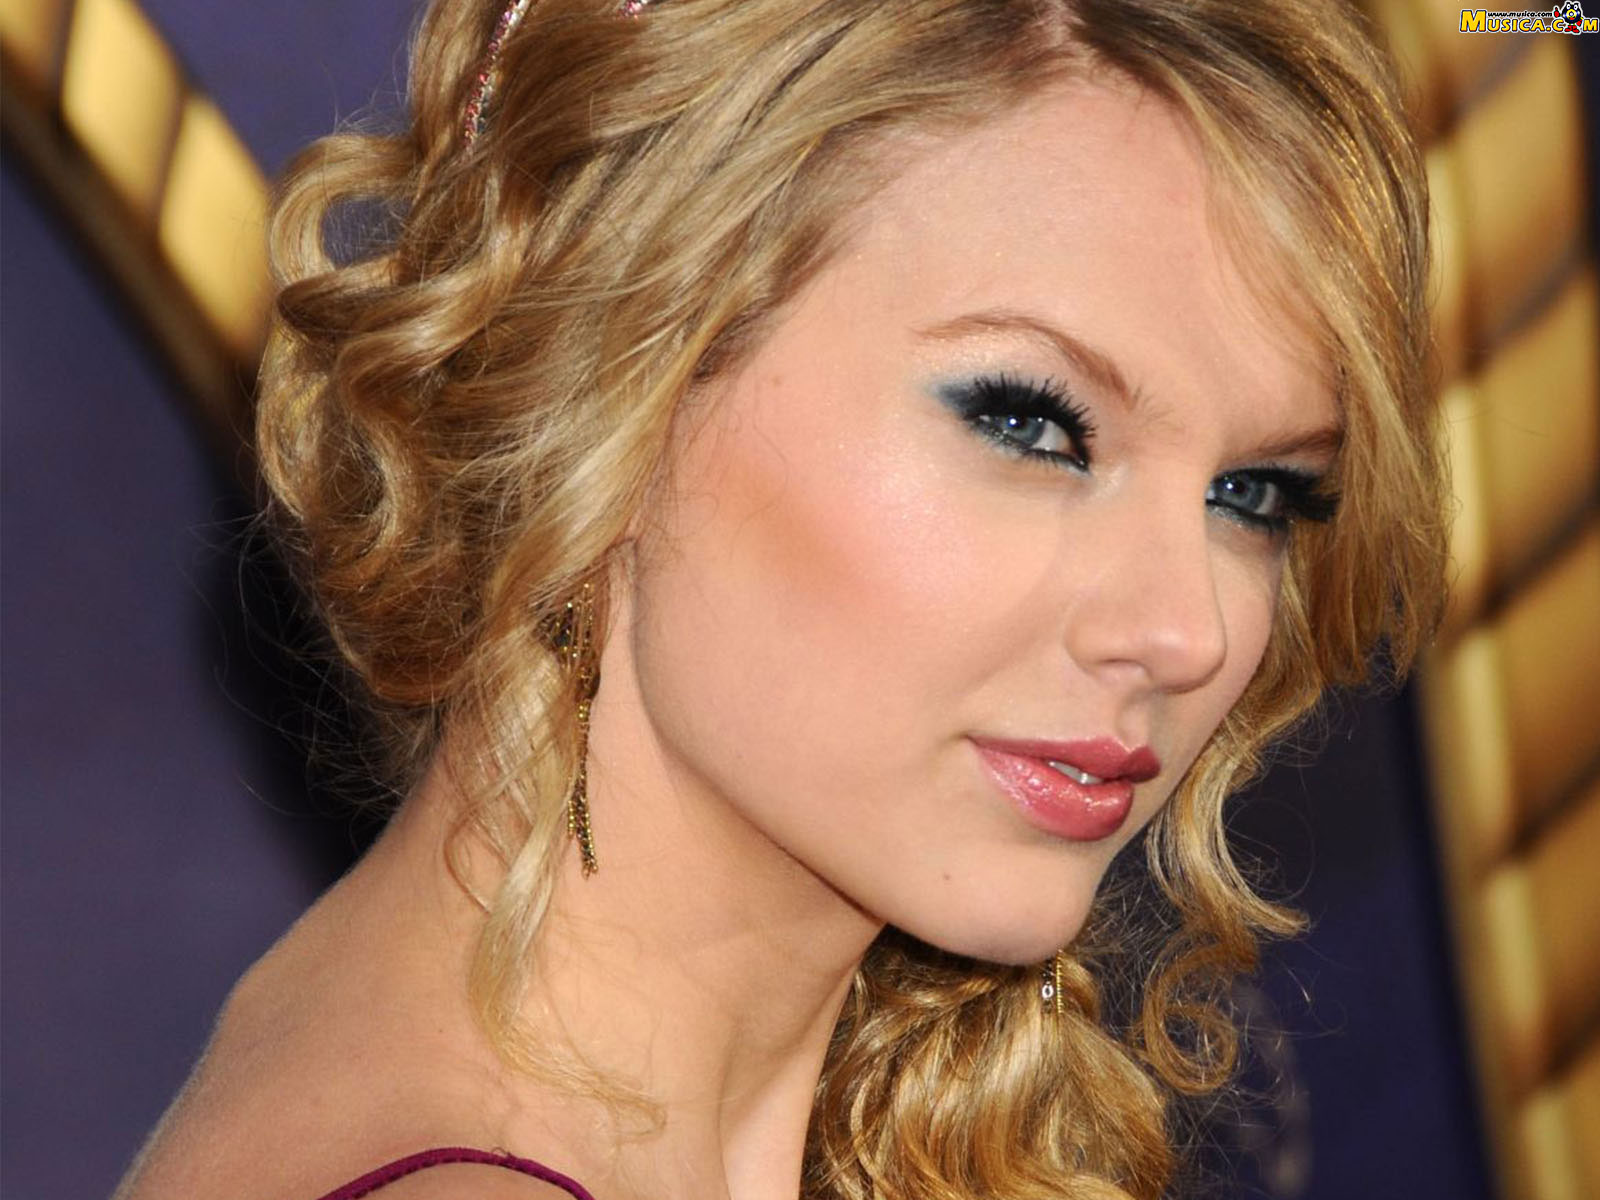 http://sparkingsnaps.blogspot.com/2014/01/taylor-swift-exclusive-hd-images.html